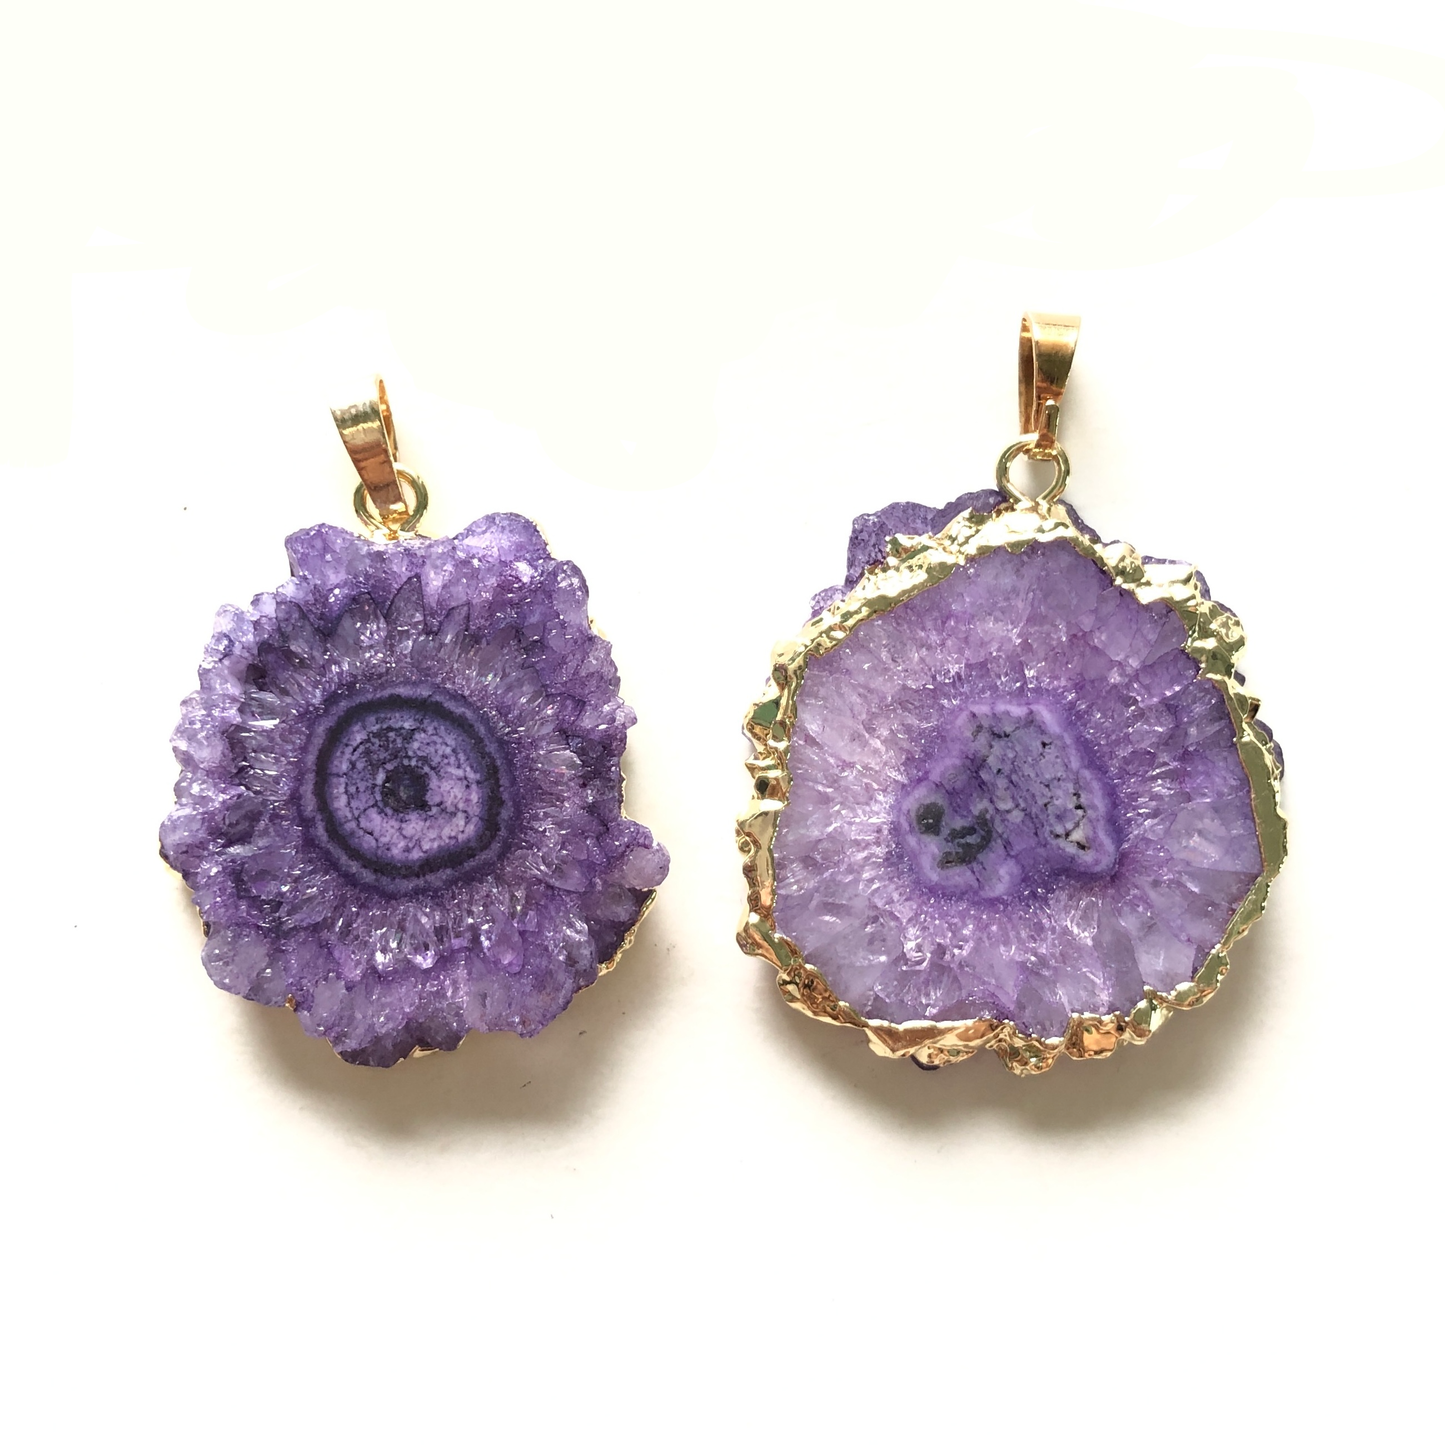 1PC 25-40mm Gold Plated Natural Sunflower Agate Charms-Premium Quality Purple on Gold Stone Charms Charms Beads Beyond